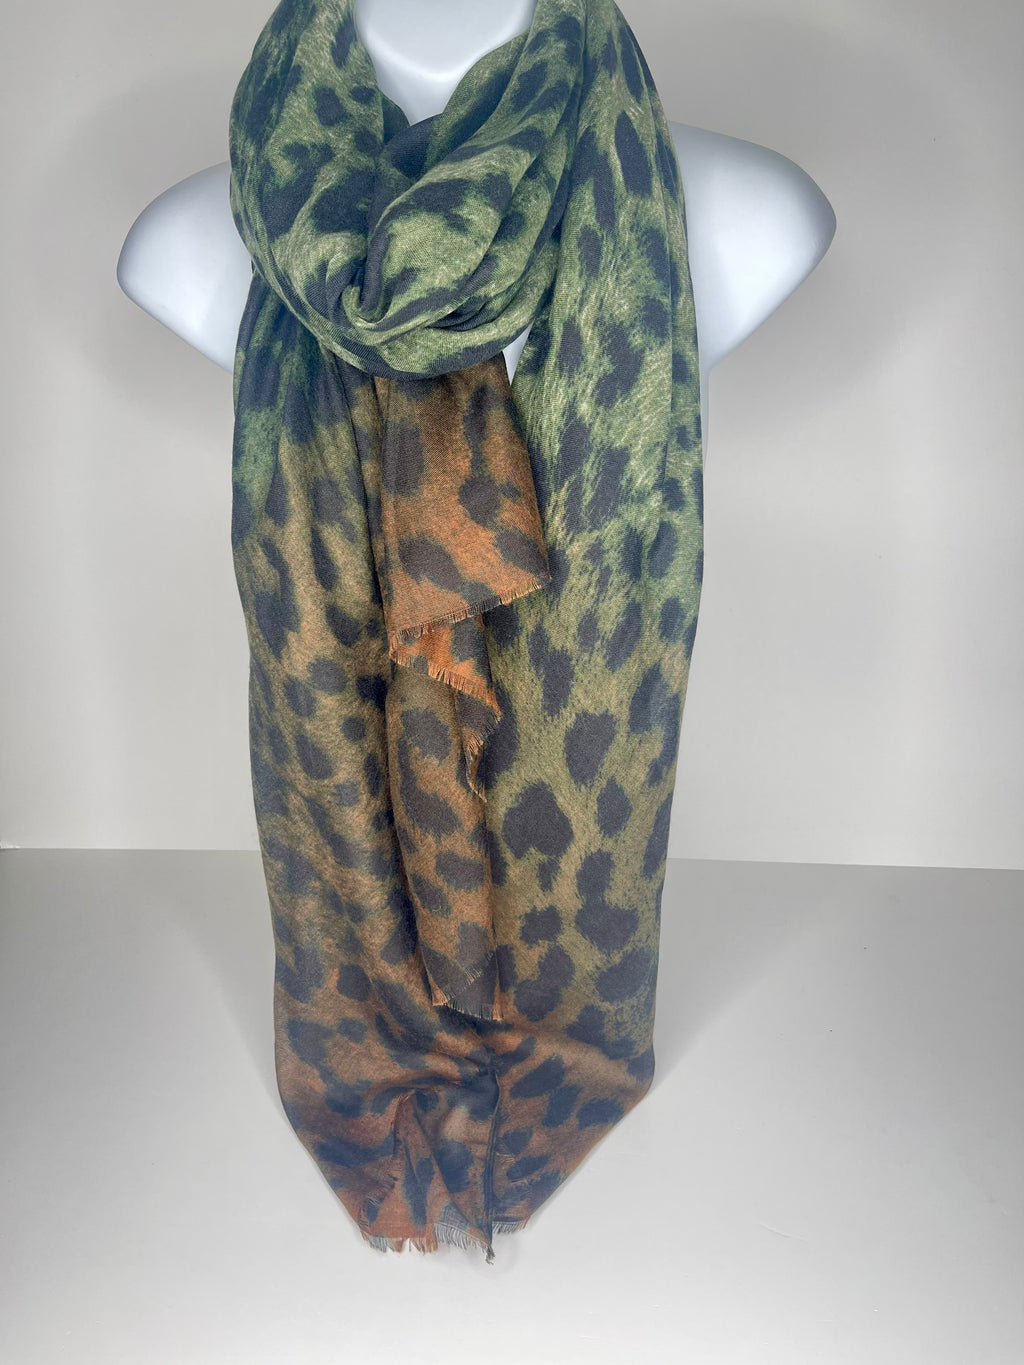 Cheetah print scarf in shades of brown and green